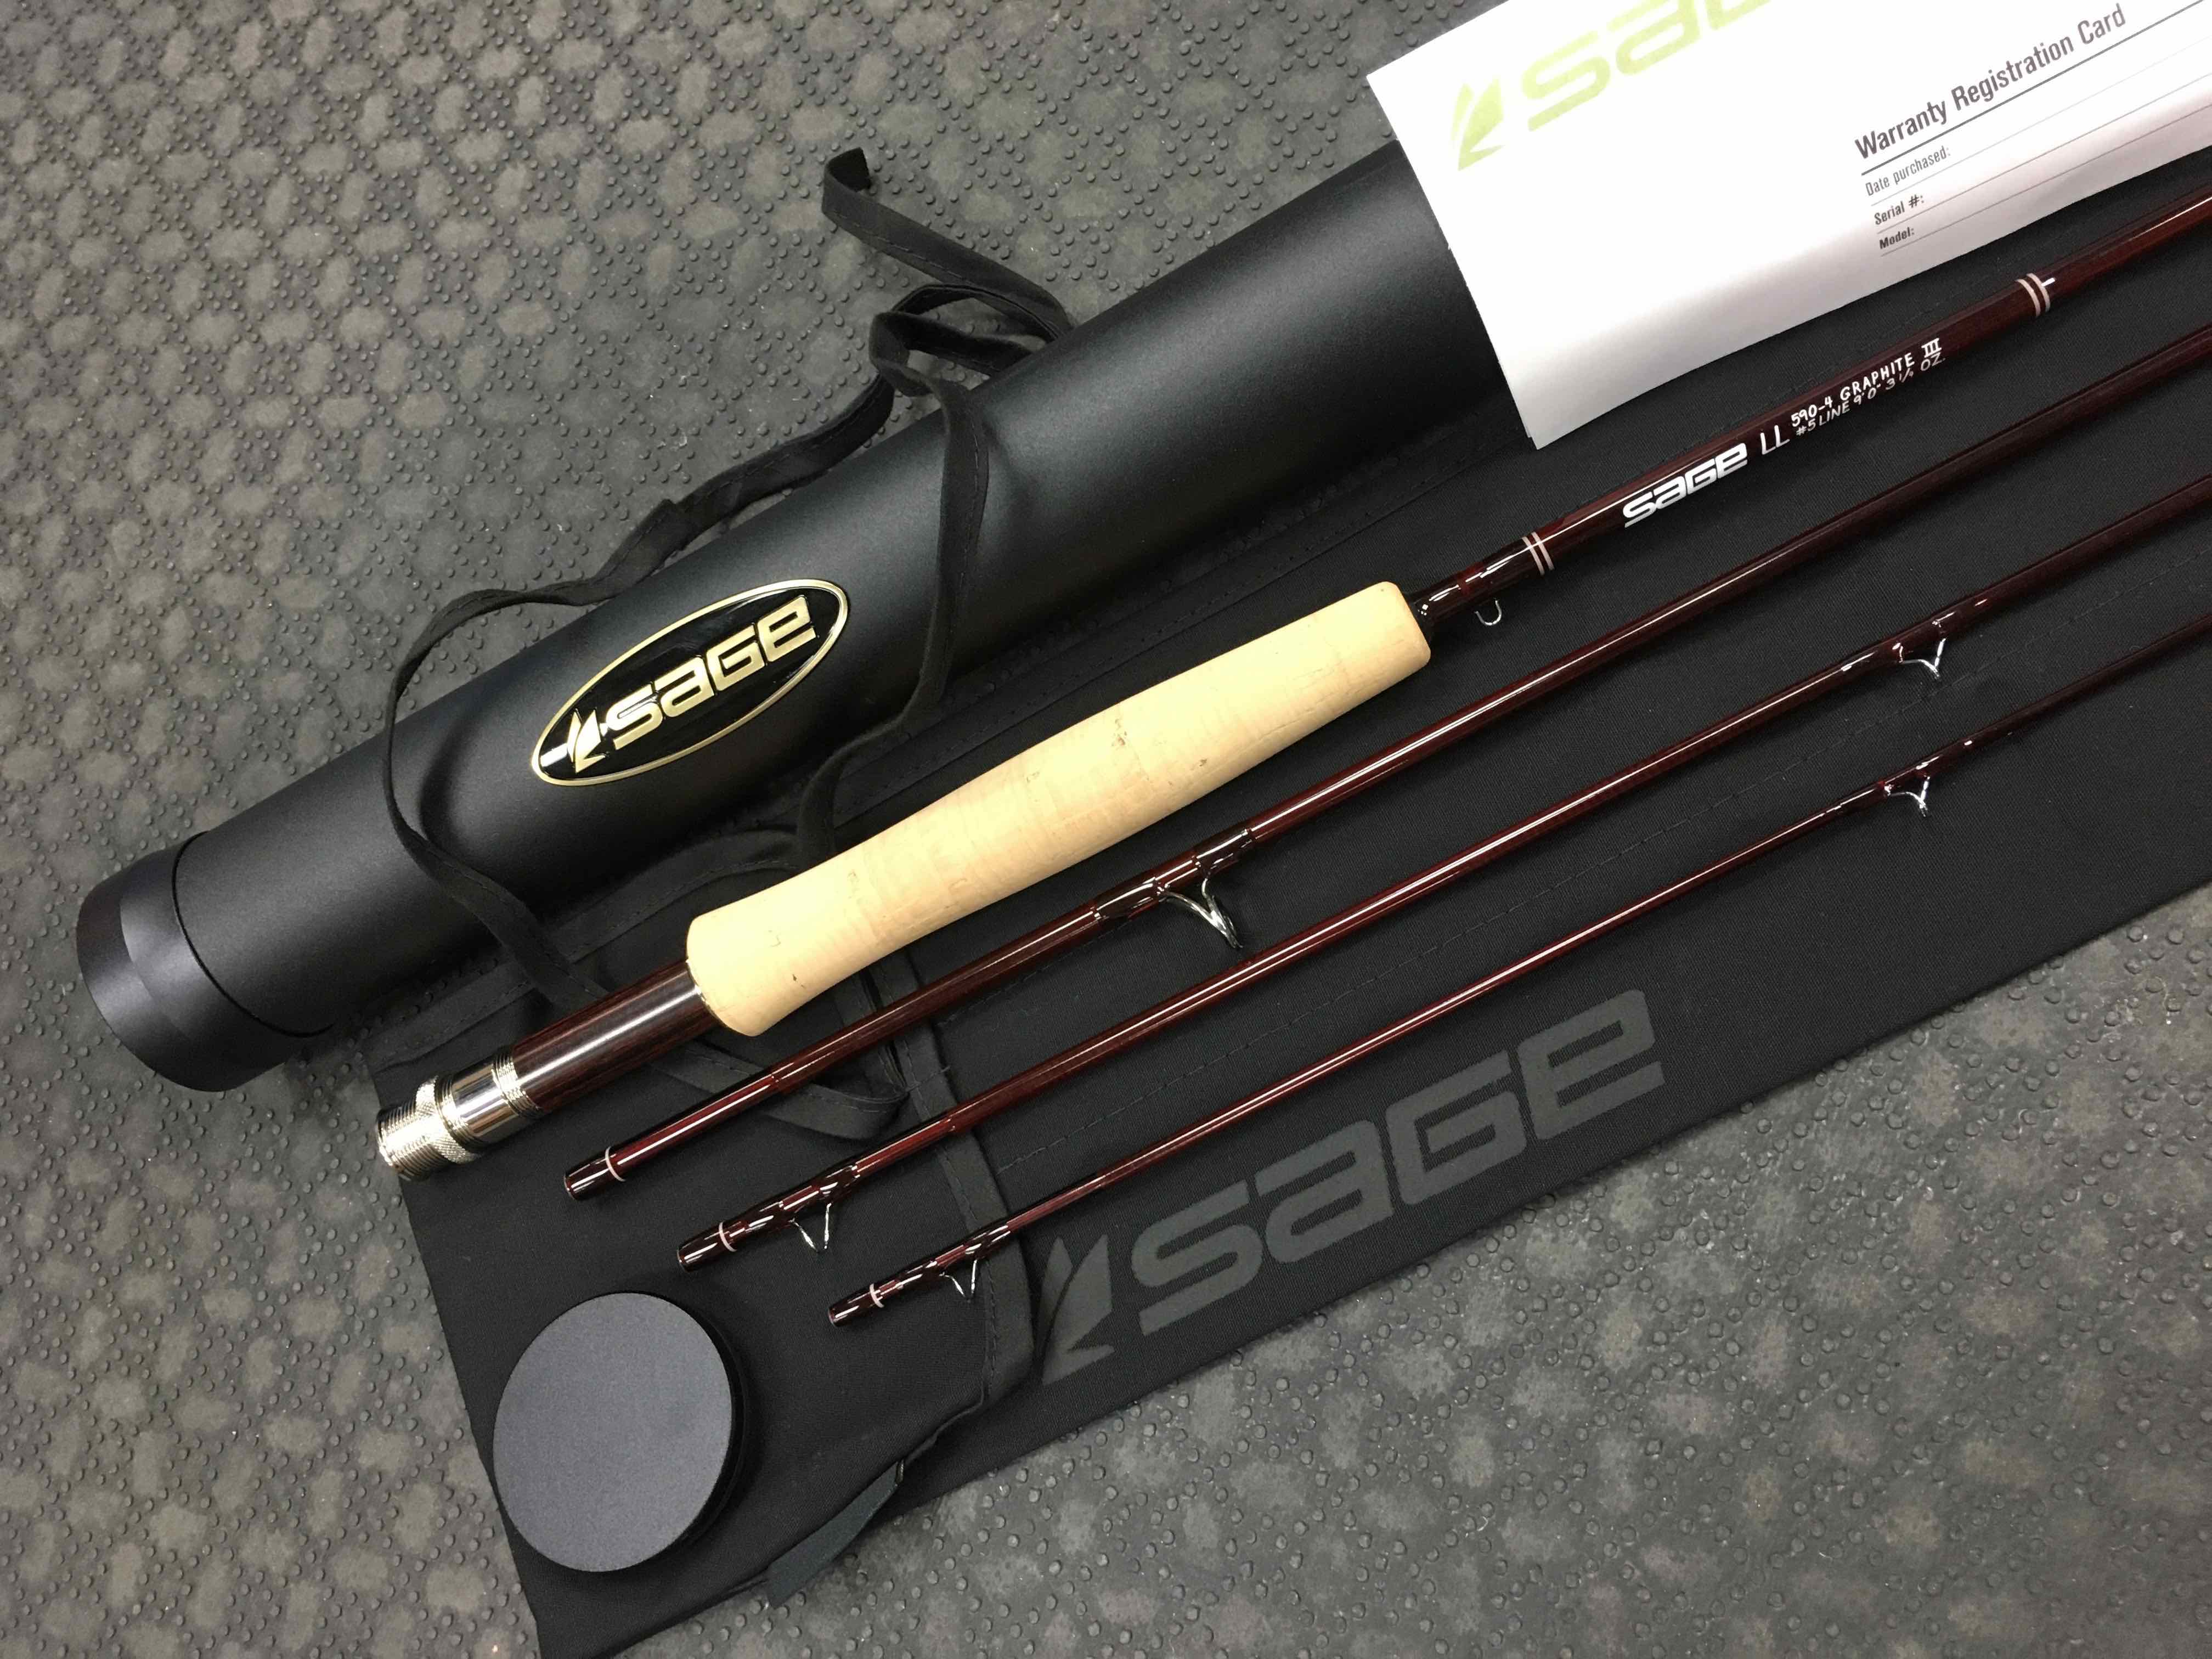 Sold Sage Ll 590 4 Graphite Iii Fly Rod 3 14oz 9 5wt 4pc Brand New Never Used 